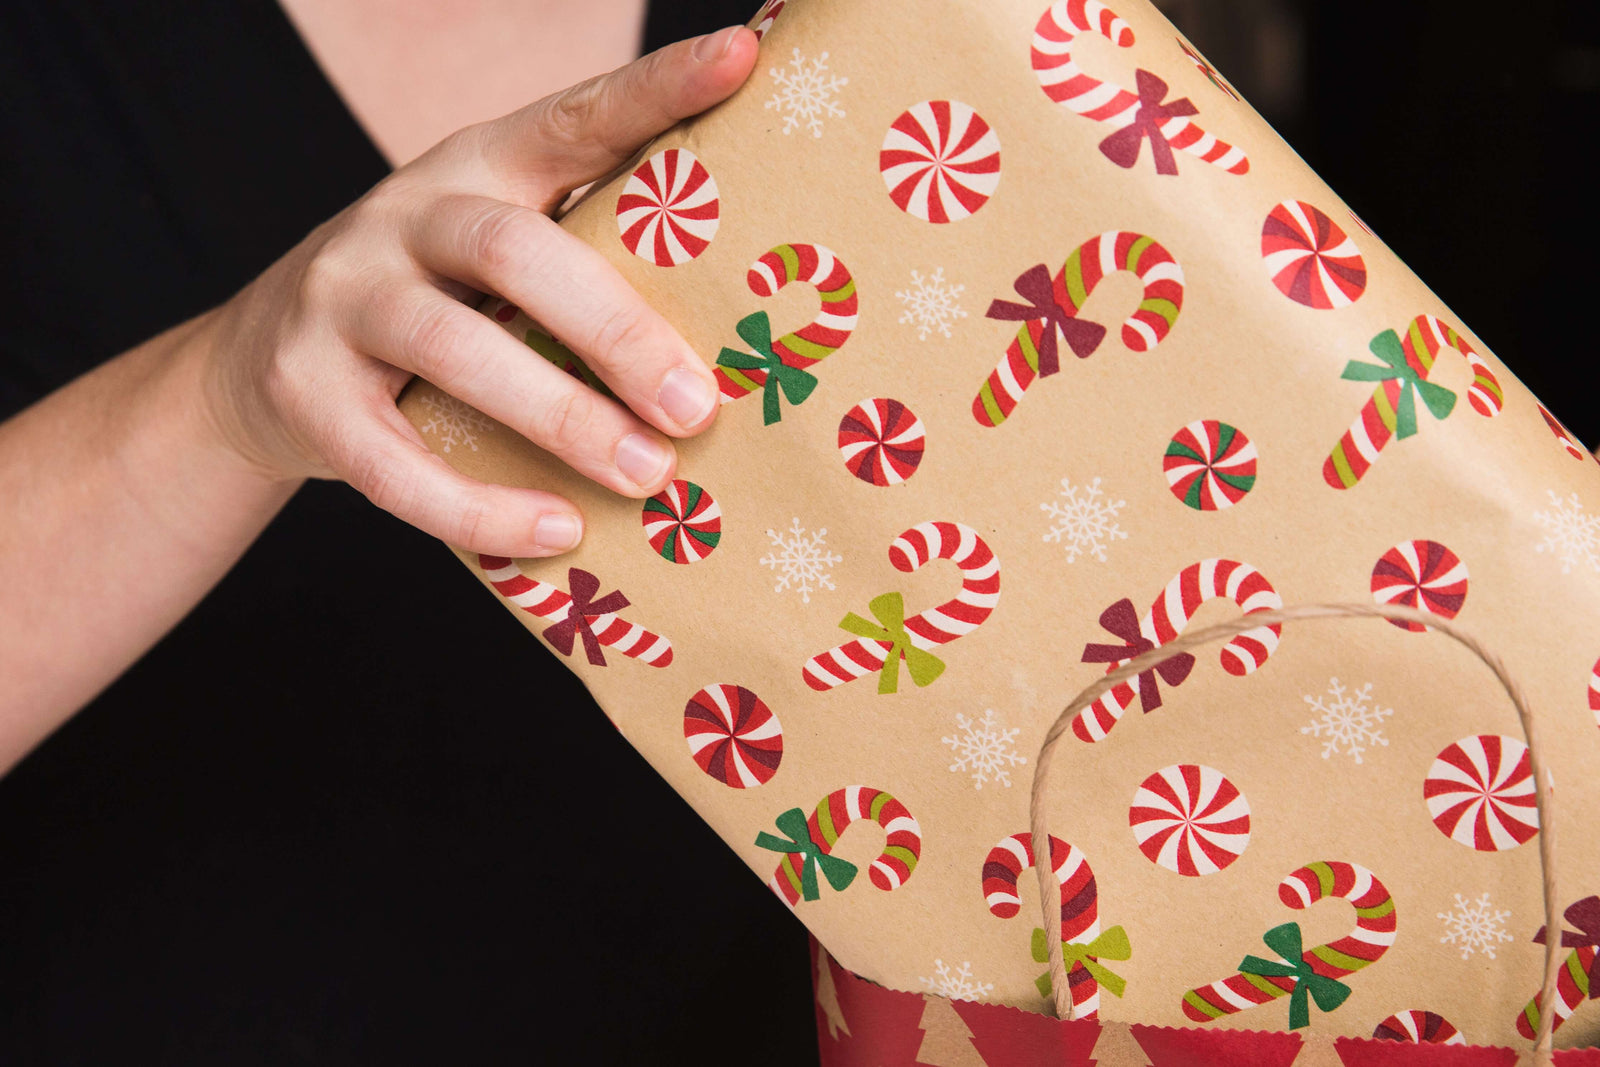 How Personalized Gifts Can Make Someone Happy